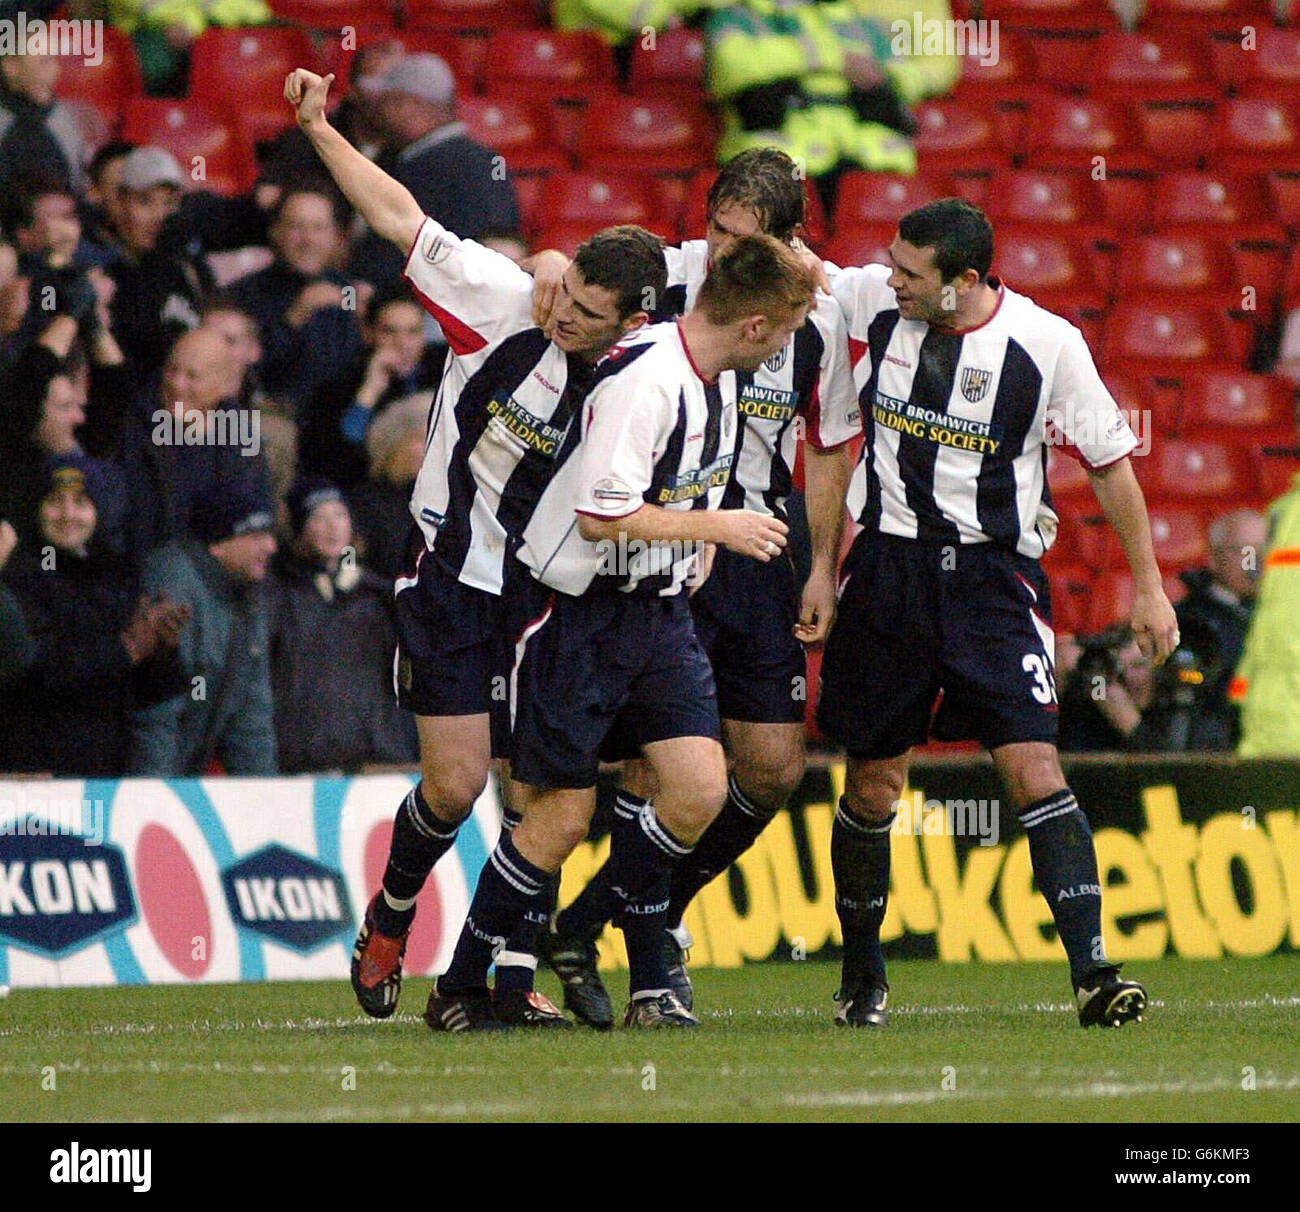 West Bromwich Albion's Jason Koumas (L) celebrates scoring against Nottingham Forest with team mates during the Nationwide Division One match at The City Ground, Nottingham, Saturday, November 29, 2003. NO UNOFFICIAL CLUB WEBSITE USE. Stock Photo